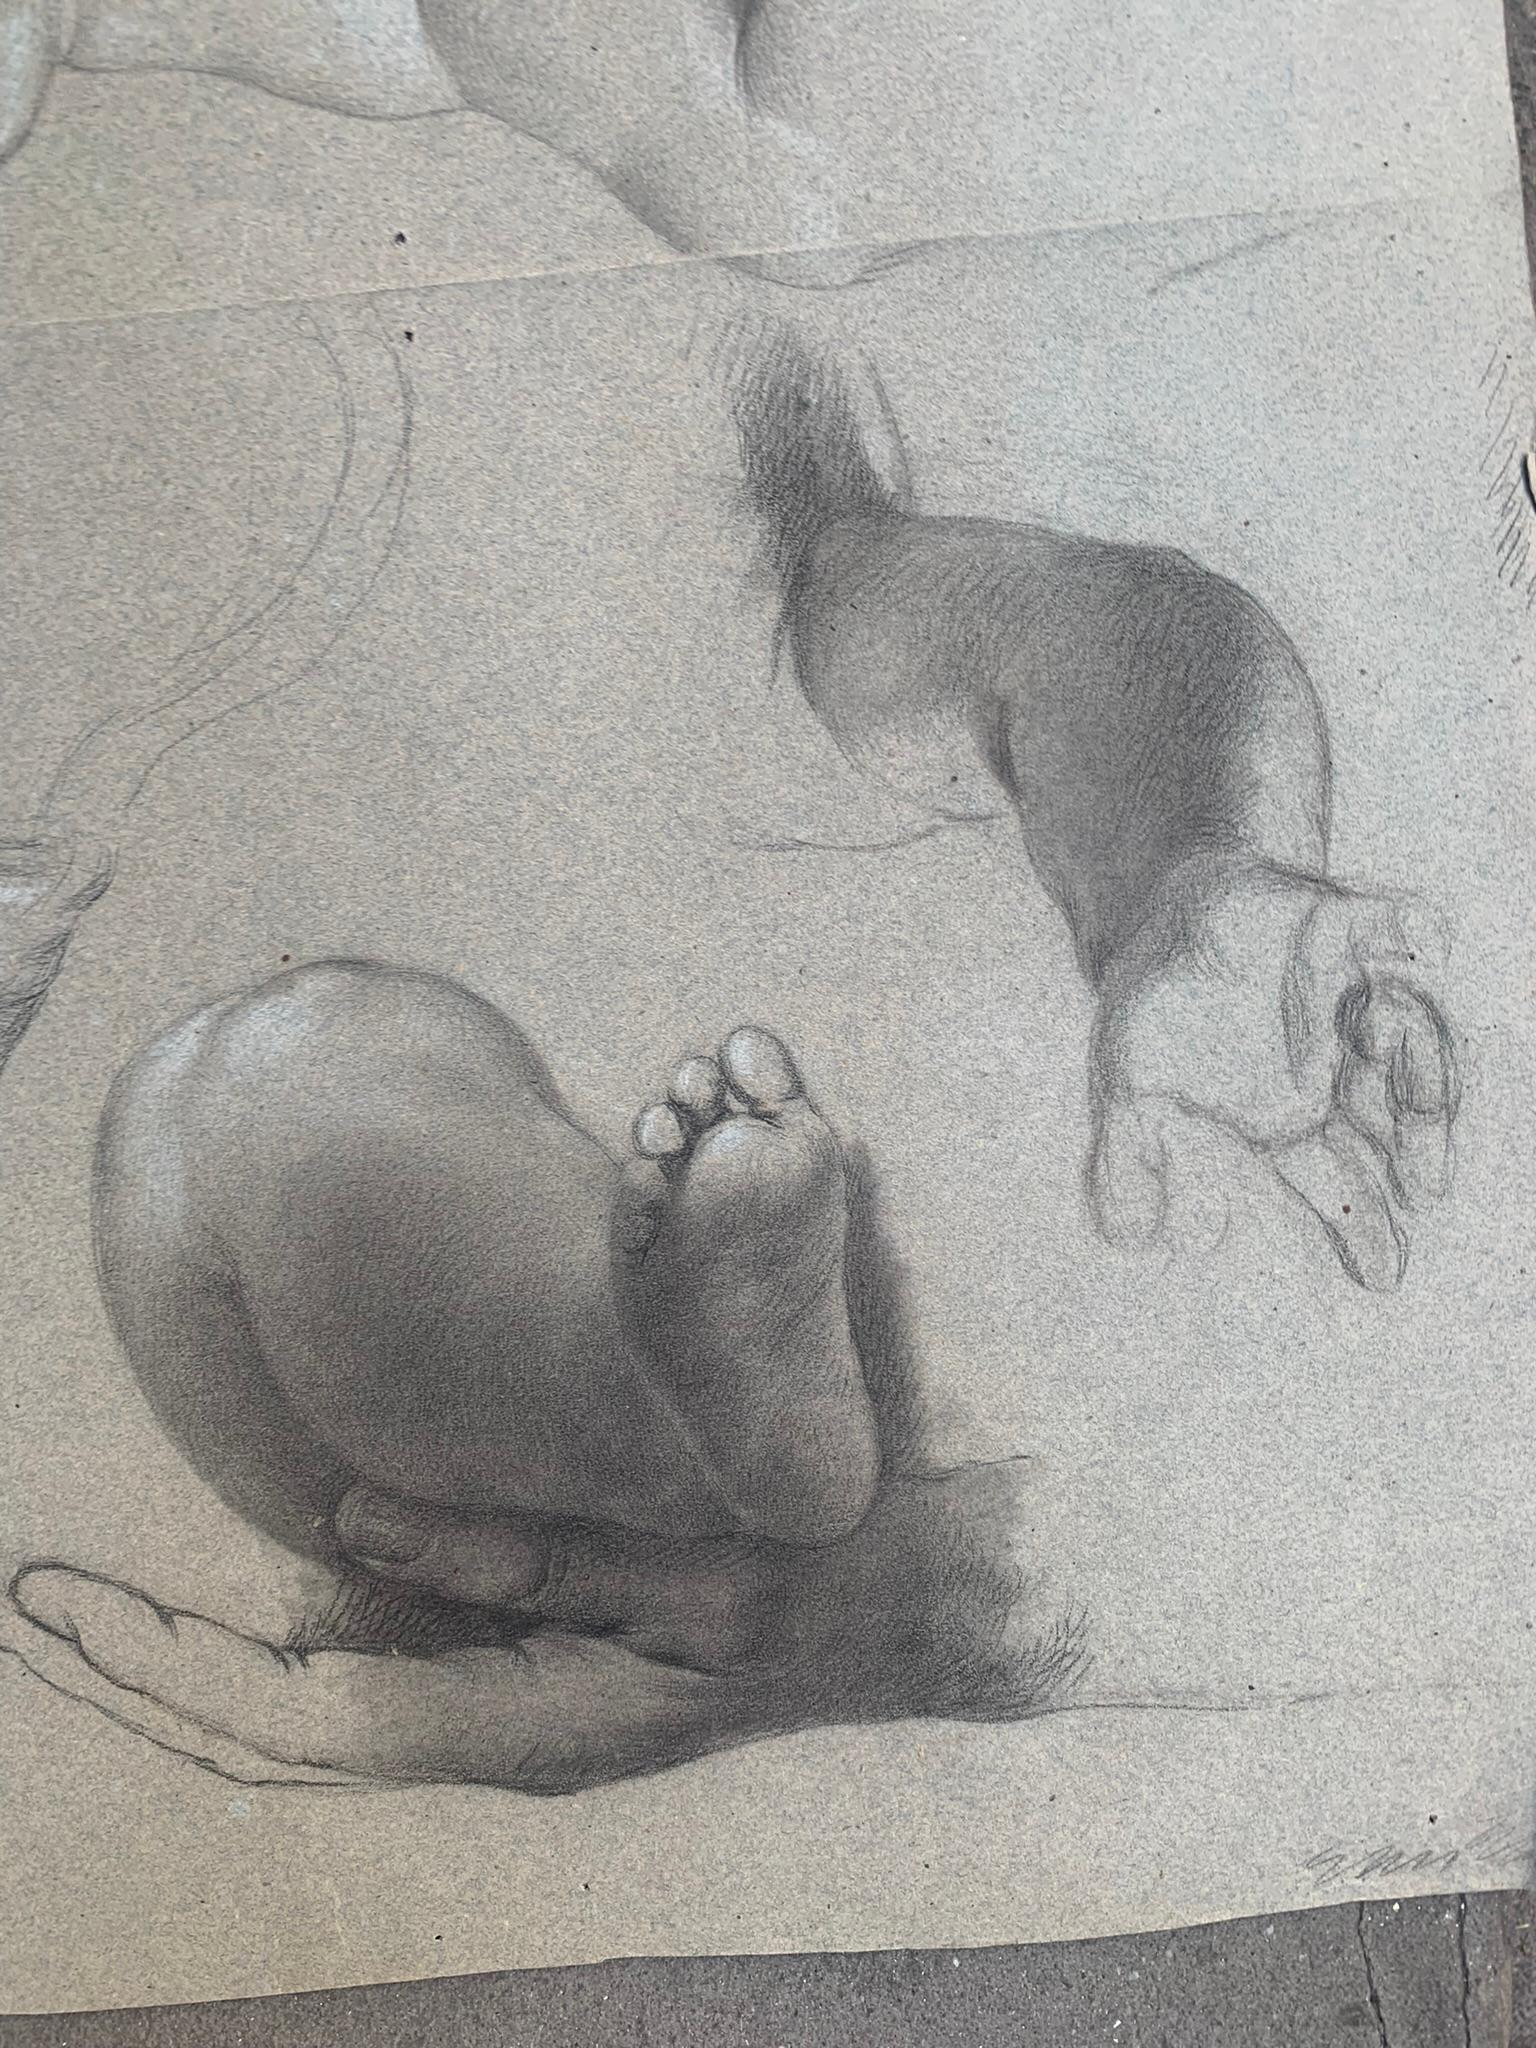 Academic study of a child's hands and feet.
Nineteenth century.
Drawing on slightly bluish gray paper. Anatomical studies are preparations for a painting or fresco with children or angels.
On the other side is a barely sketched anatomical study of a